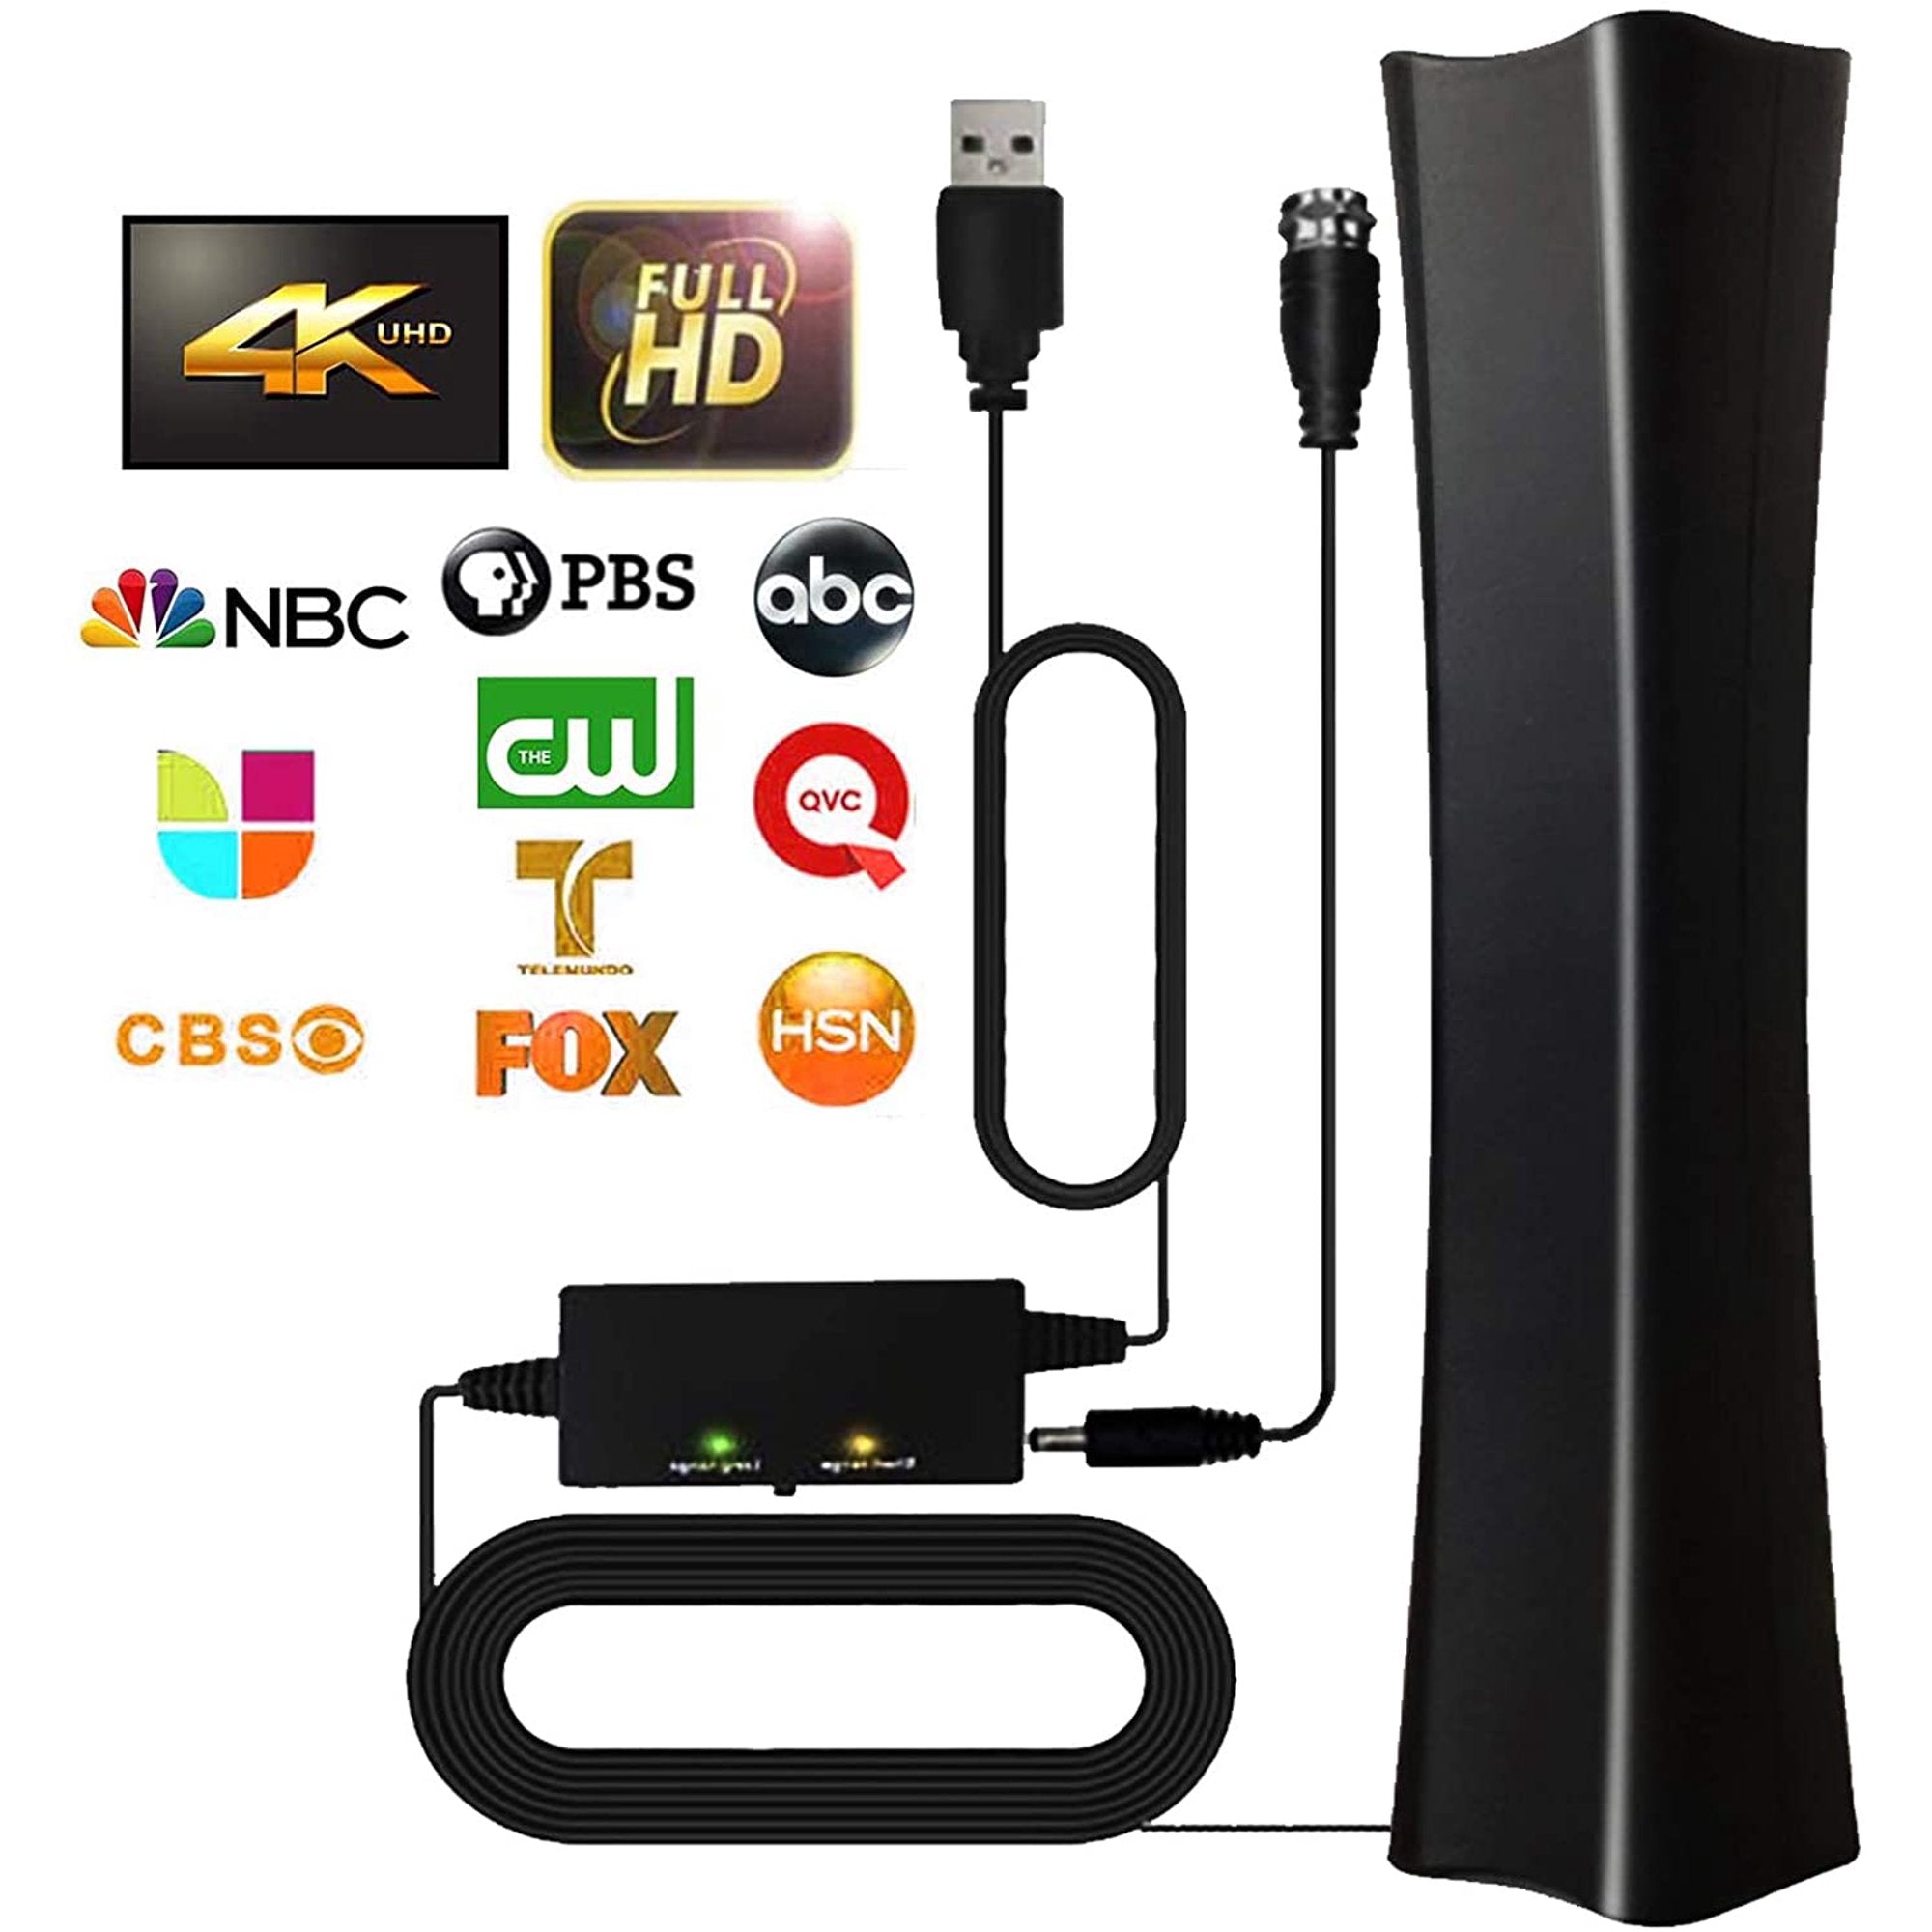 TV Antenna, 2022 Newest Digital Amplified HD TV Antenna, 380+ Miles Range Support 4K 1080P, Indoor Outdoor Smart Switch Amplifier Signal Booster, UHF VHF Freeview HDTV Channels with 17ft Coax Cable